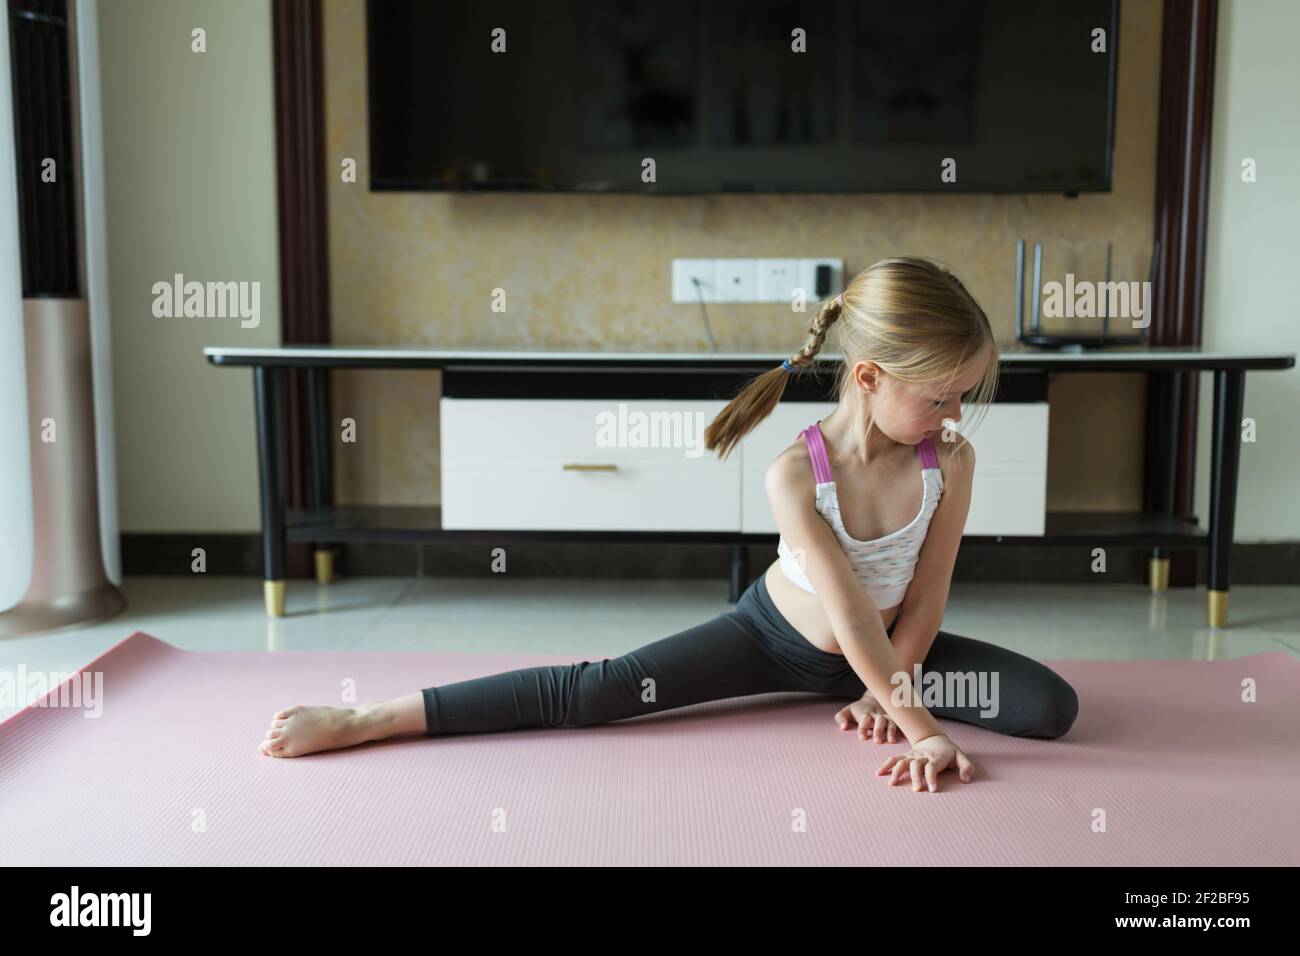 https://c8.alamy.com/comp/2F2BF95/cute-little-girl-in-sportswear-doing-fitness-exercises-at-home-distant-training-with-personal-trainer-social-distance-or-self-isolation-online-2F2BF95.jpg